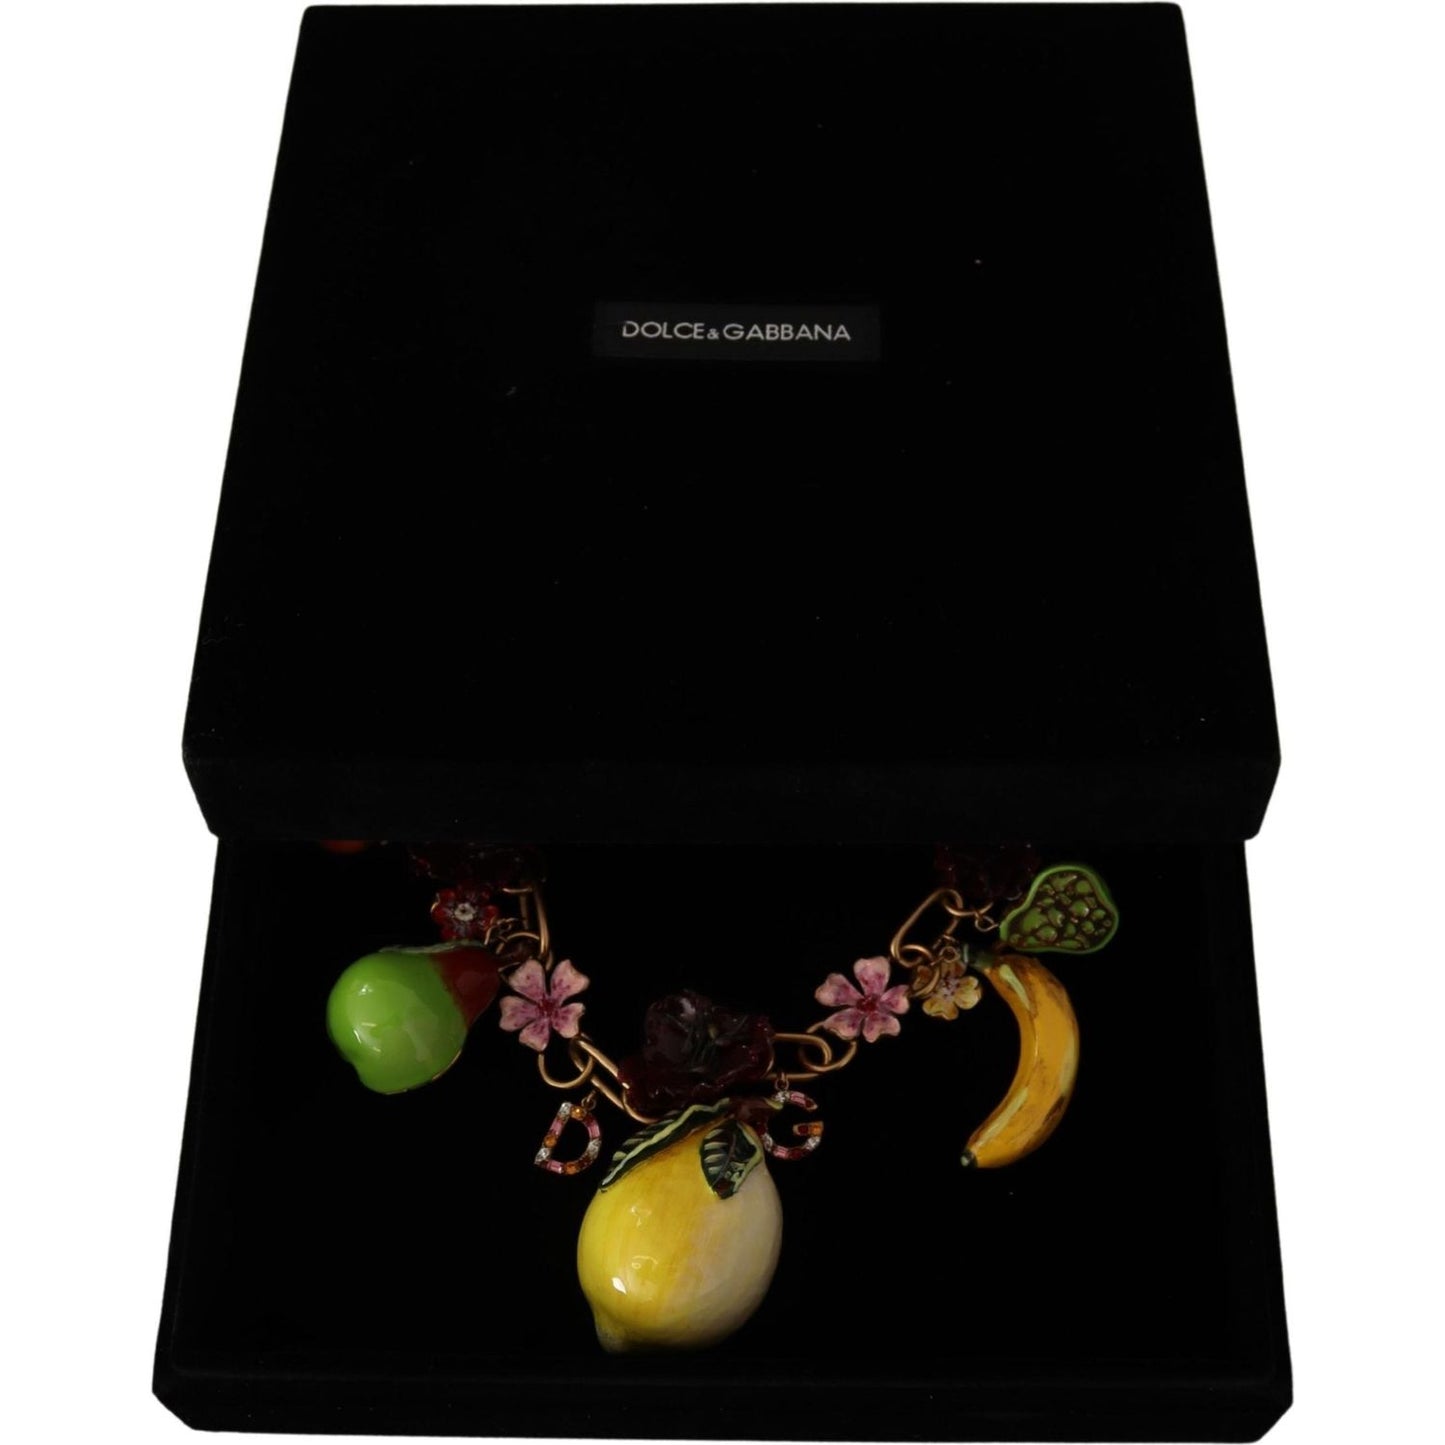 Dolce & Gabbana Chic Gold Statement Sicily Fruit Necklace WOMAN NECKLACE gold-brass-sicily-fruits-roses-statement-necklace IMG_1920-scaled-99bf04f0-ec8.jpg